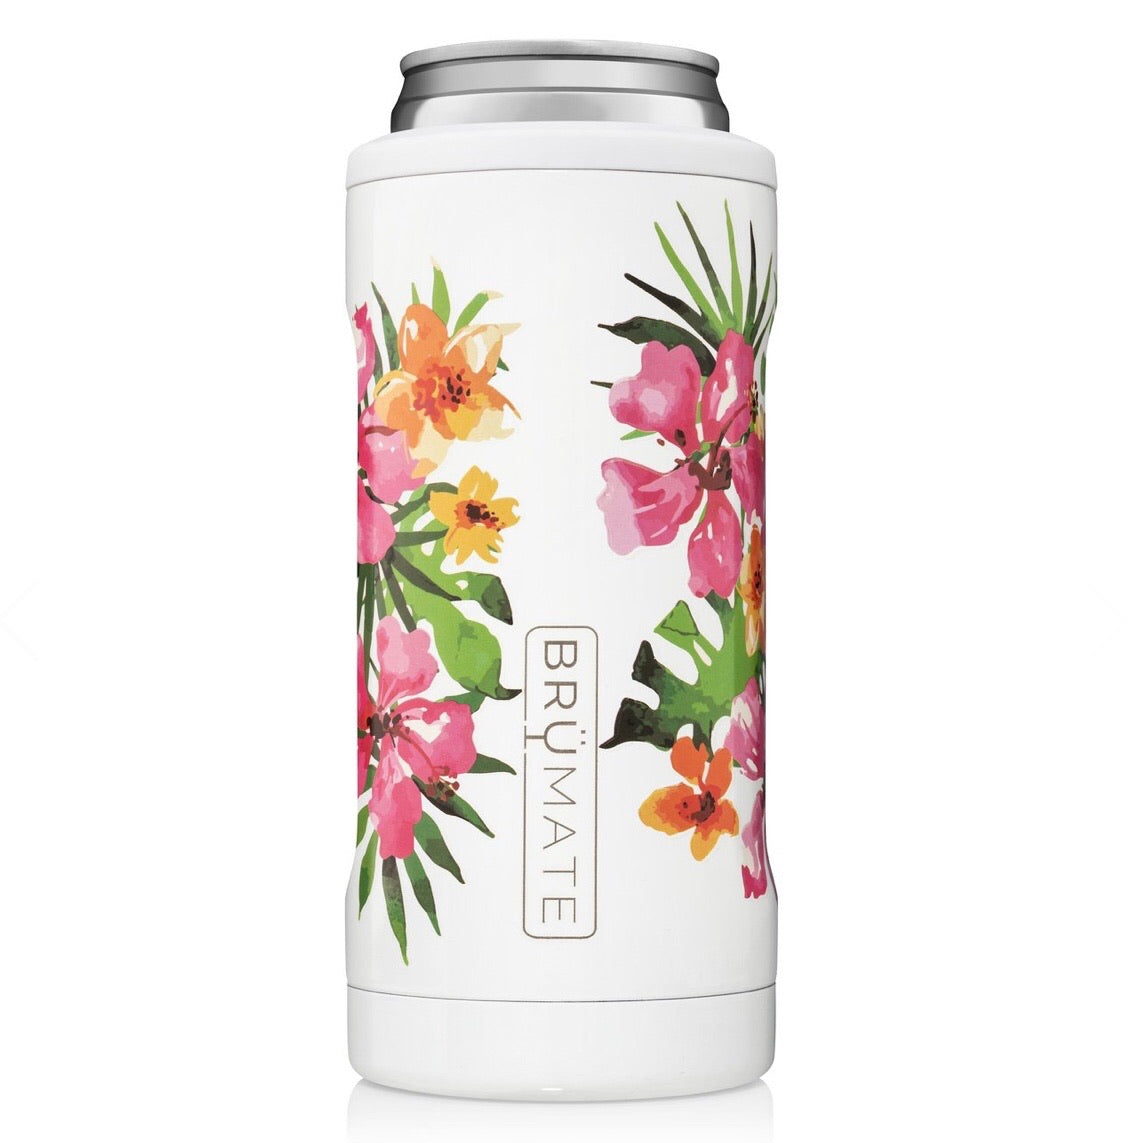 slim cans leak-proof drinkware hot to cold insulated drinkware tumbler like yeti brumate spillproof flowers tropical